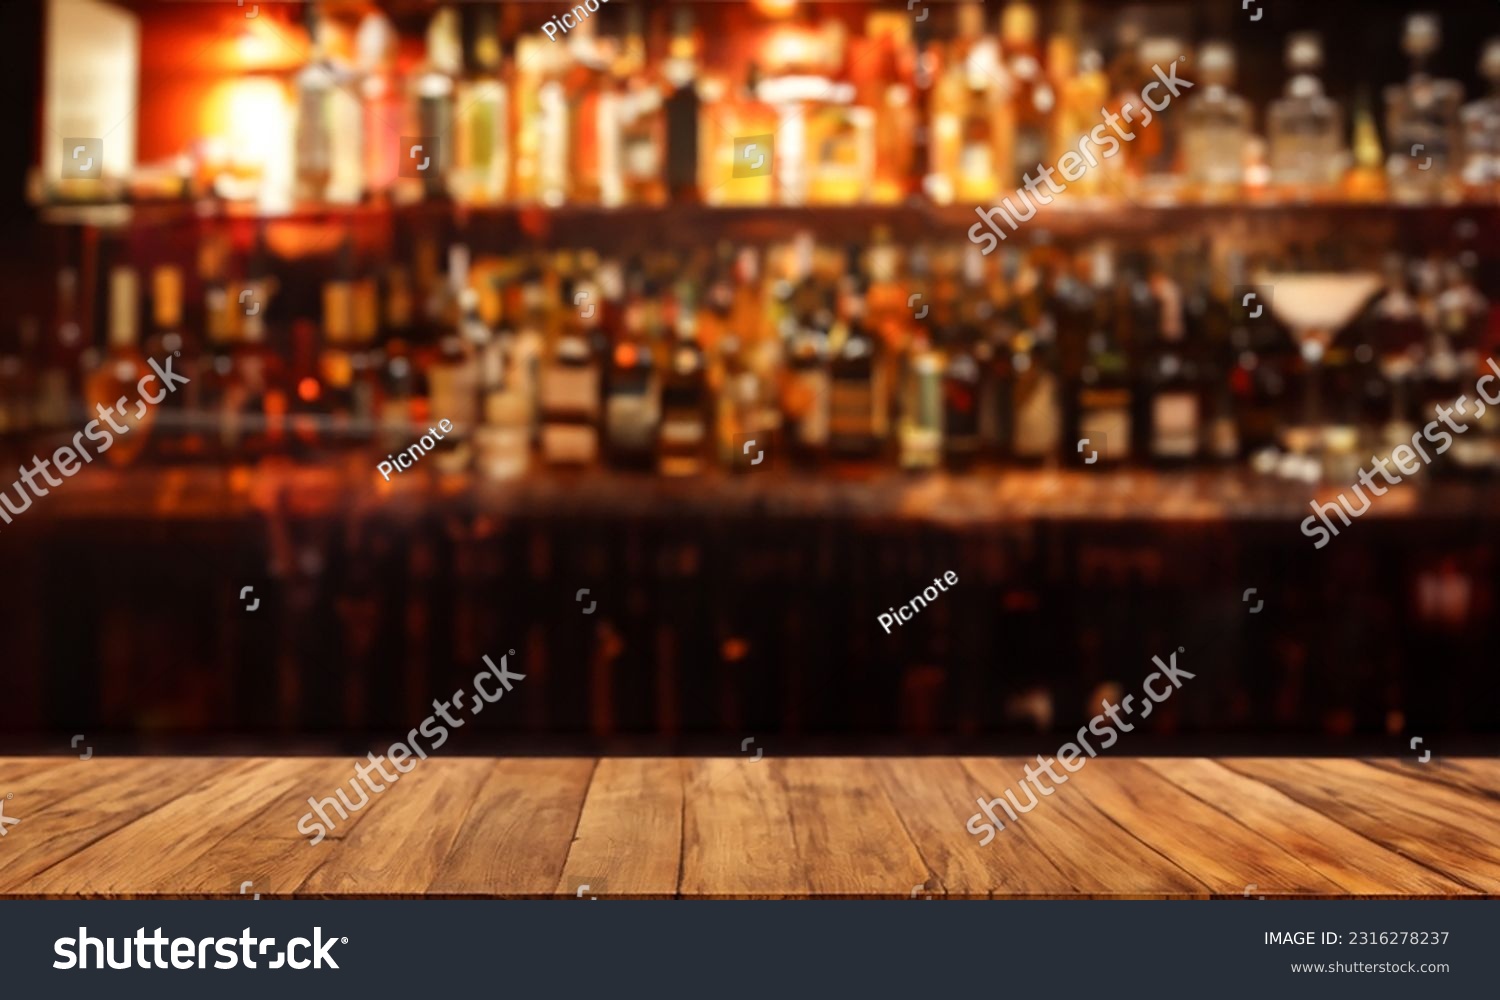 Liquor bar background in softfocus with woonden table #2316278237